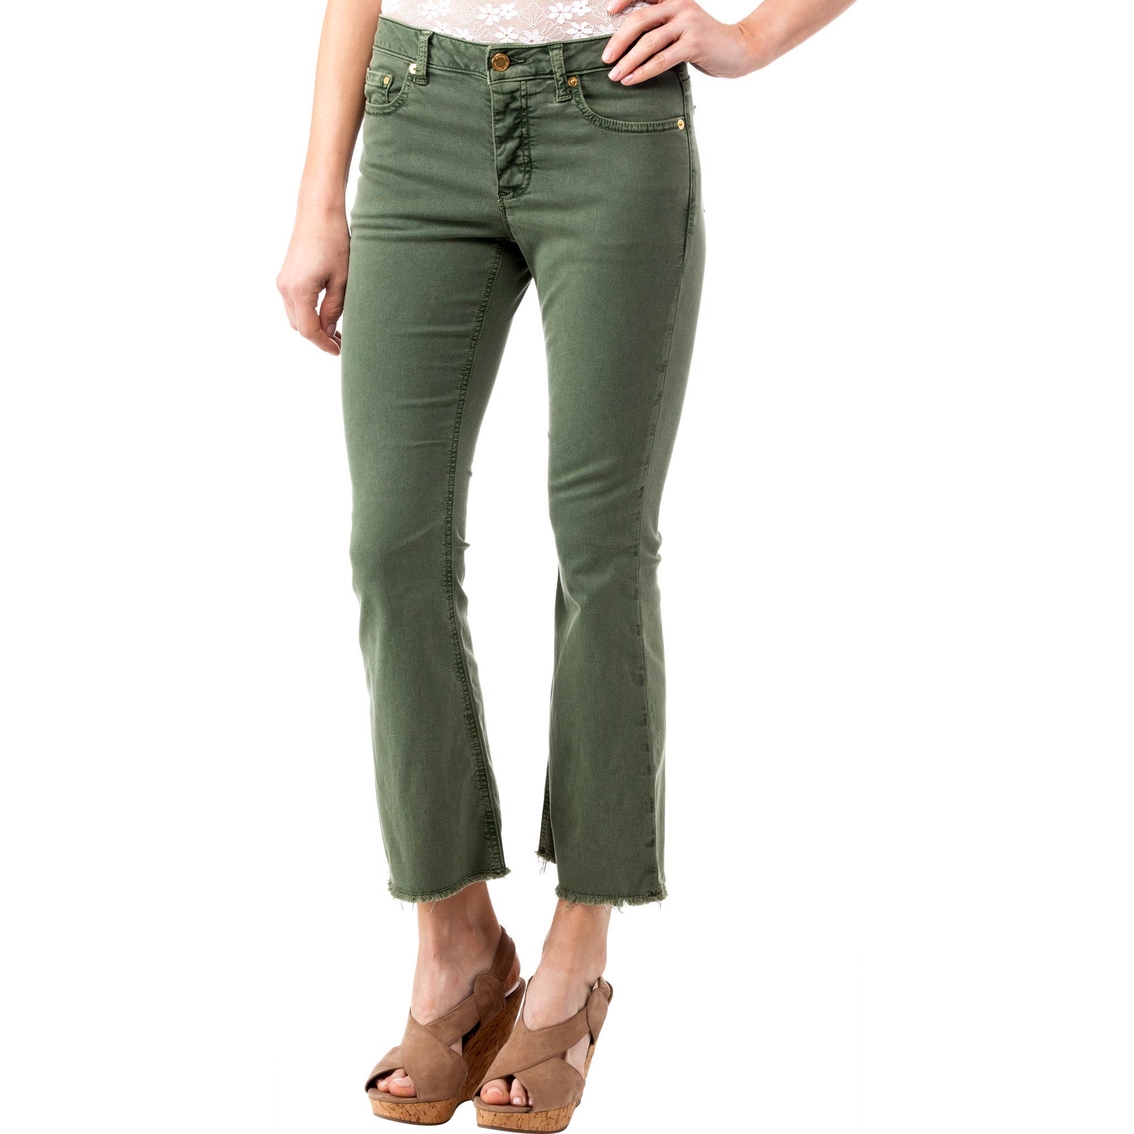 Michael Kors Cropped Kick Garment Dyed Jeans - Image 3 of 3